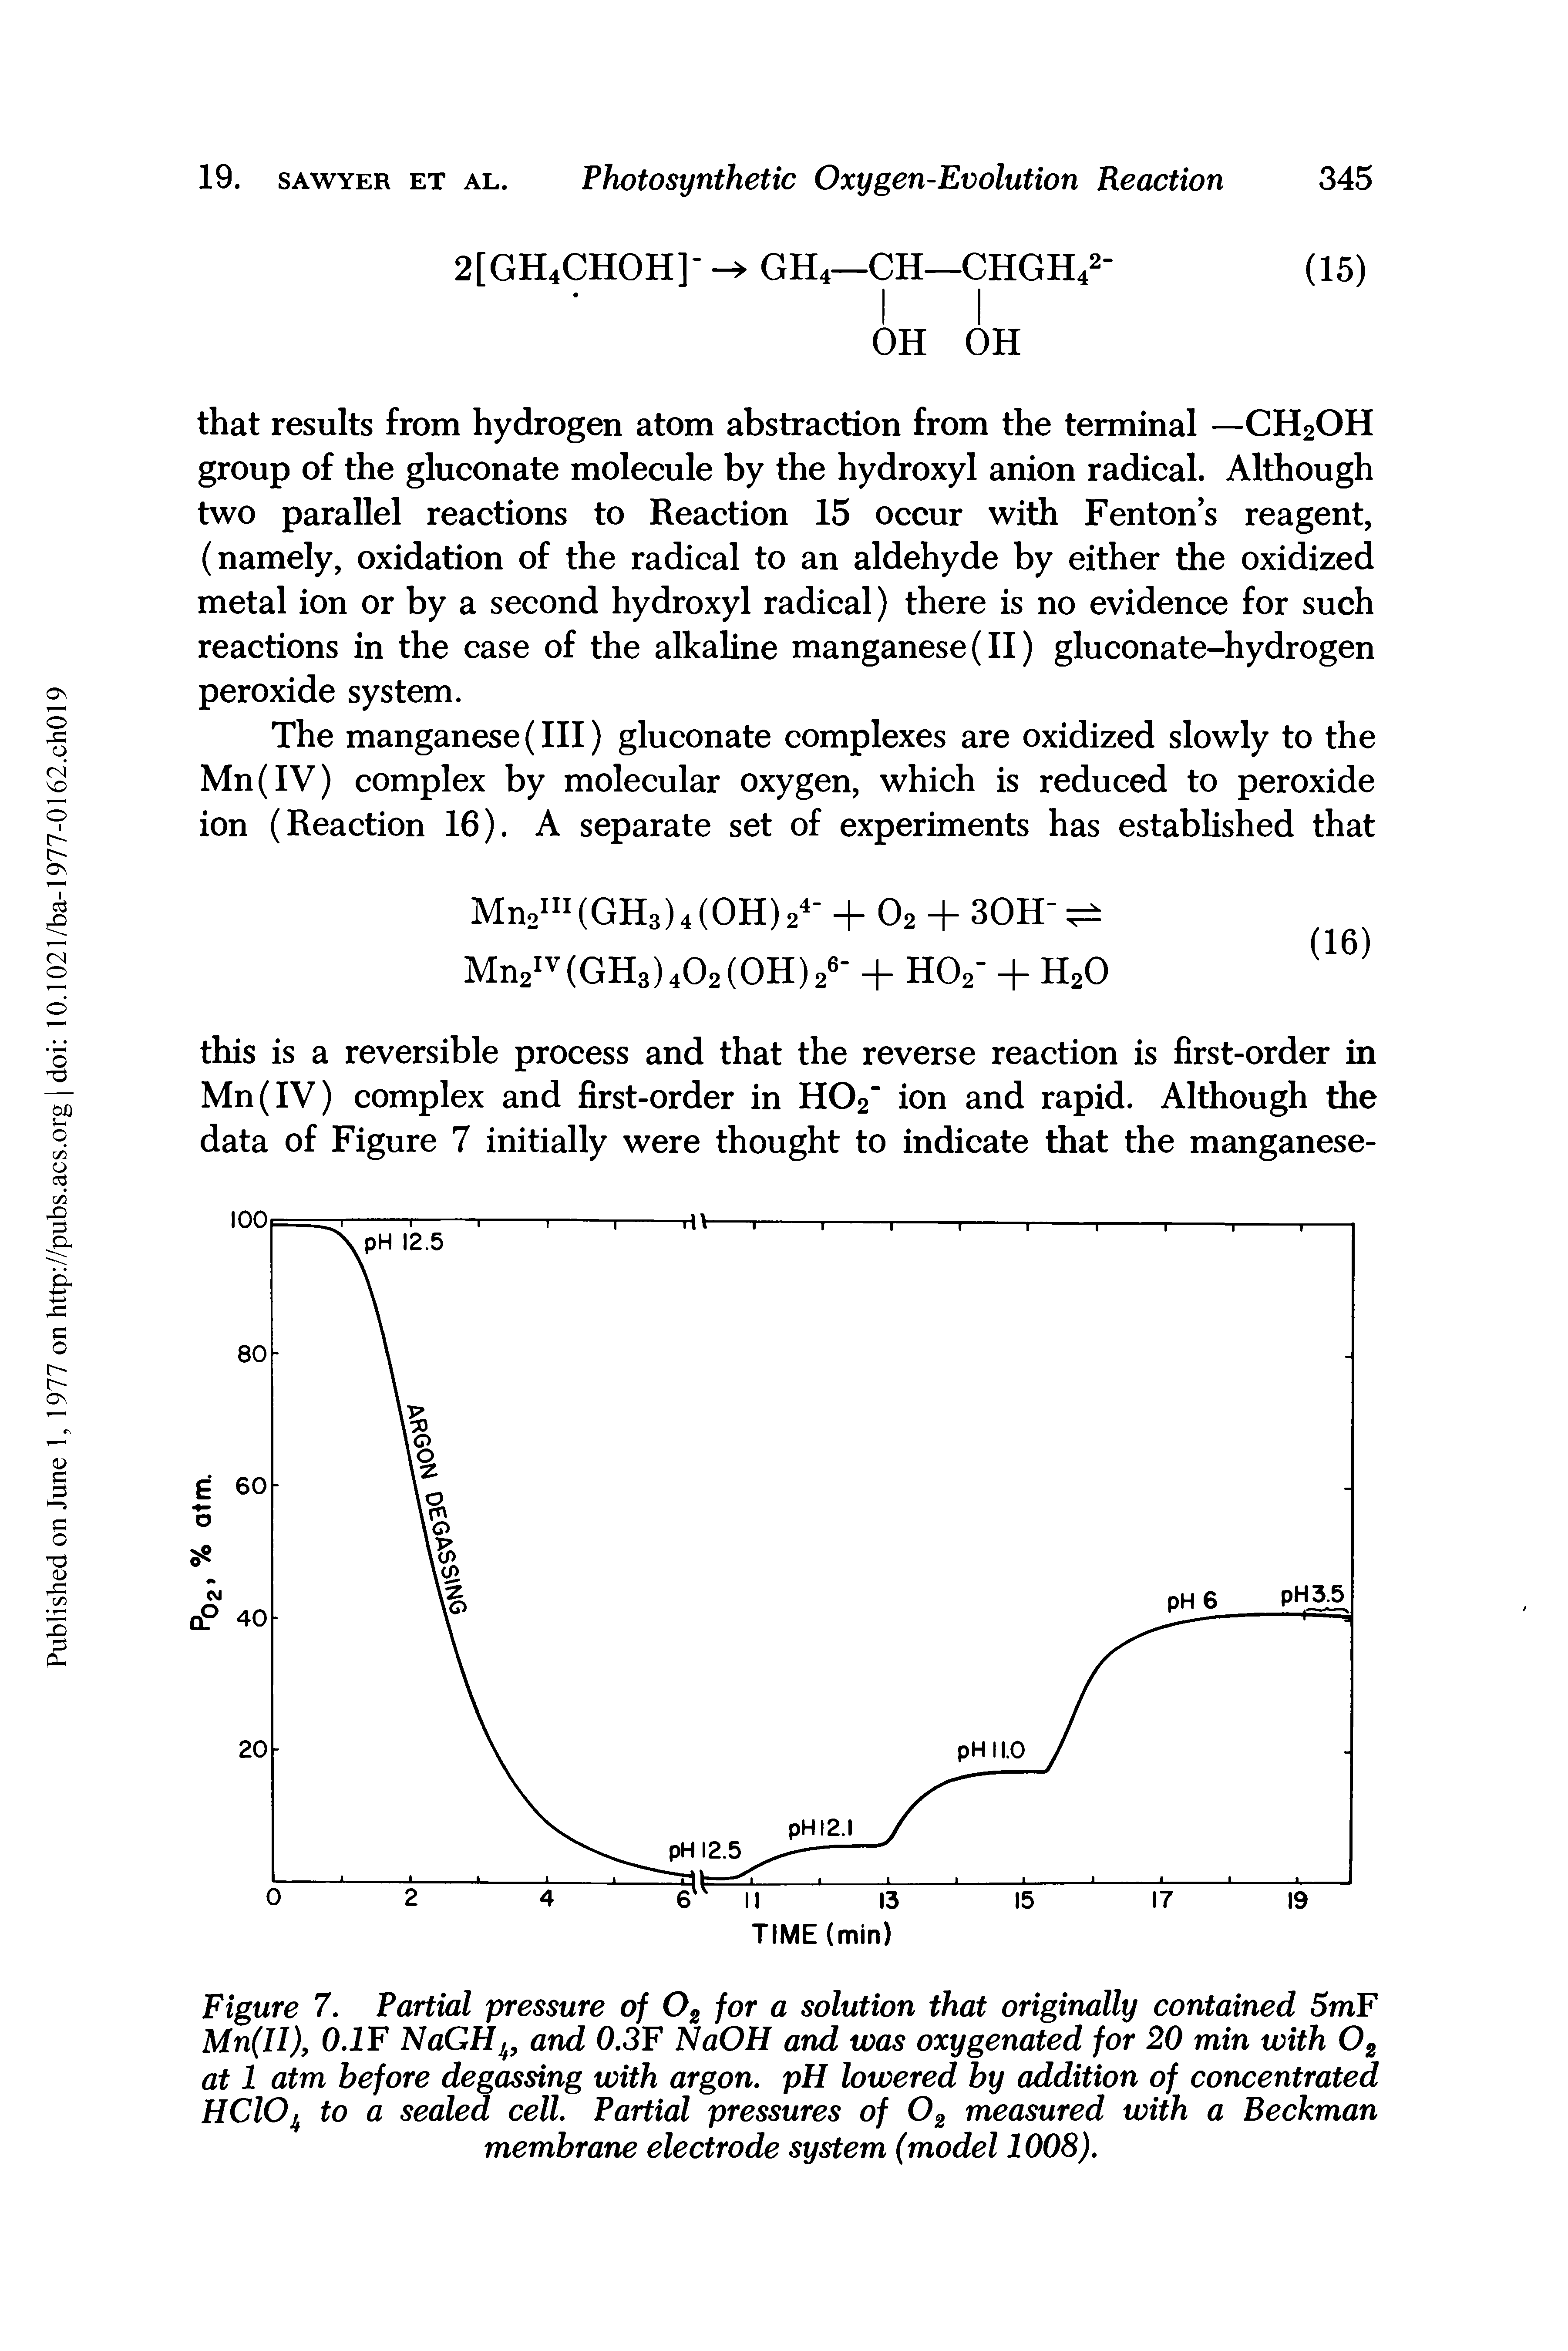 Figure 7. Partial pressure of 02 for a solution that originally contained 5mF Mn(II), 0.1F NaGH and 0.3F NaOH and was oxygenated for 20 min with Oz at 1 atm before degassing with argon. pH lowered by addition of concentrated HCIOj to a sealed cell. Partial pressures of 02 measured with a Beckman membrane electrode system (model 1008).